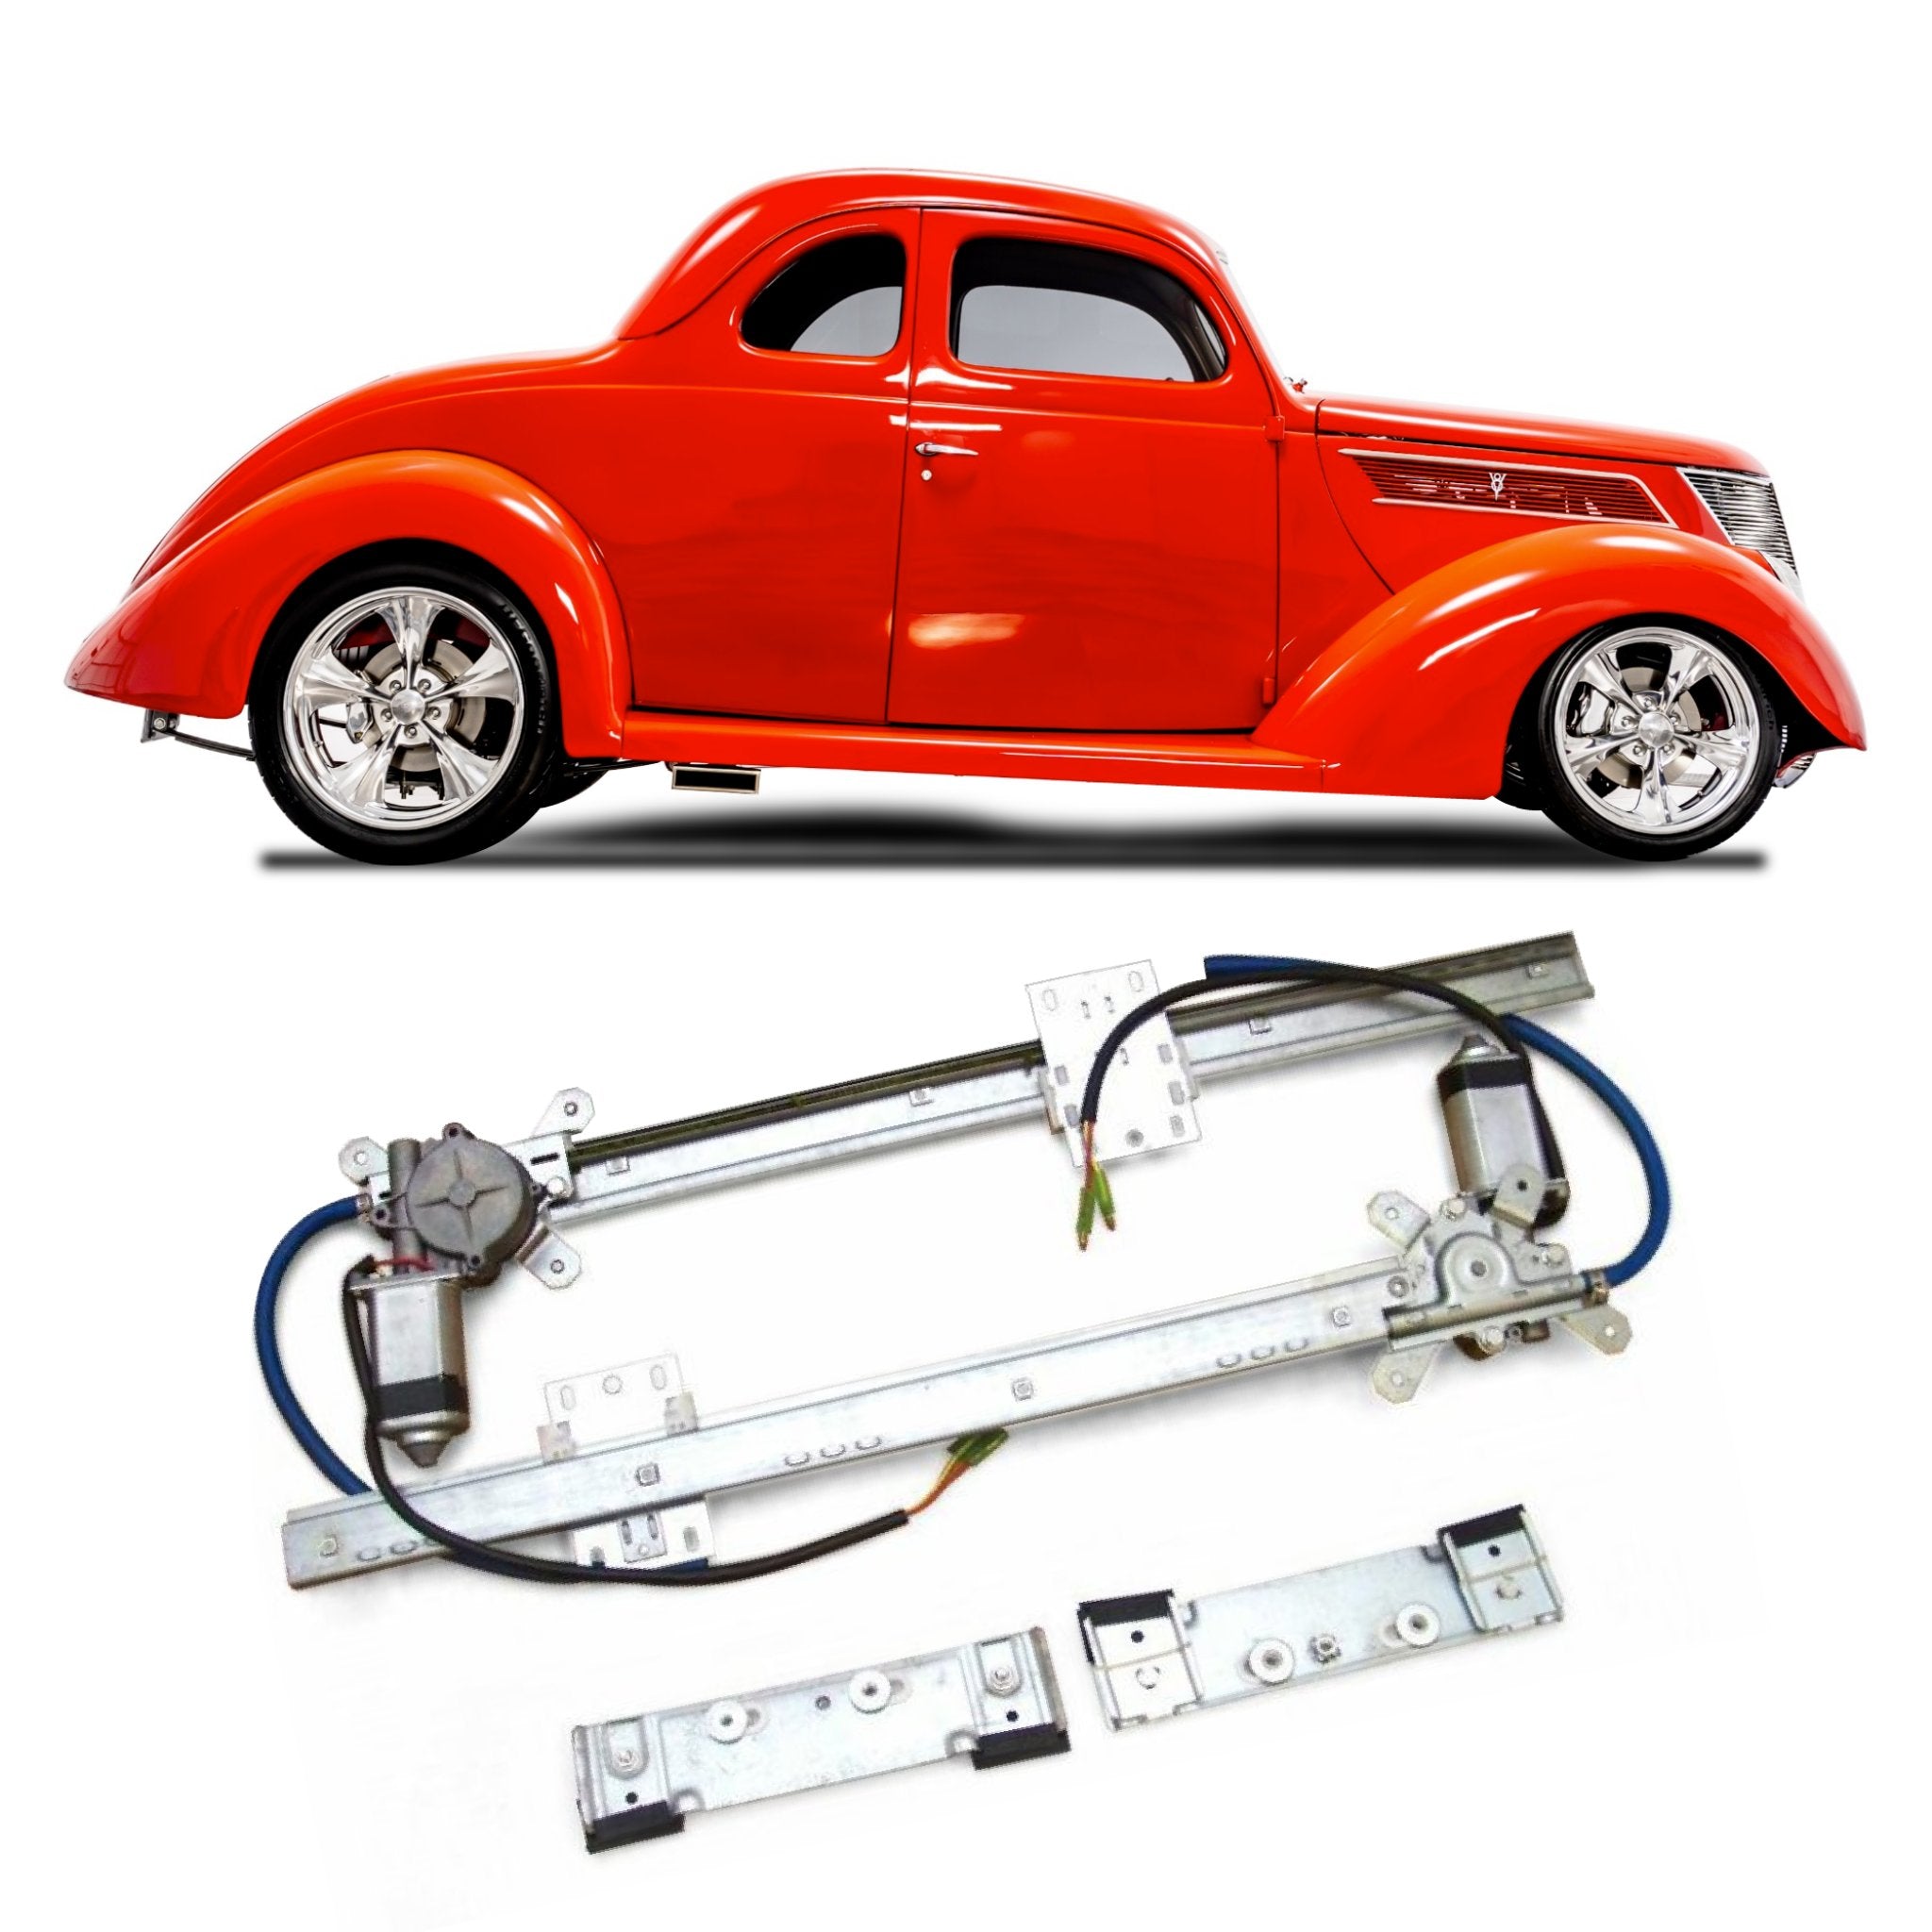 2 Door 12V Power Window Conversion Kit for 1937 Ford Coupe Club Standard Deluxe